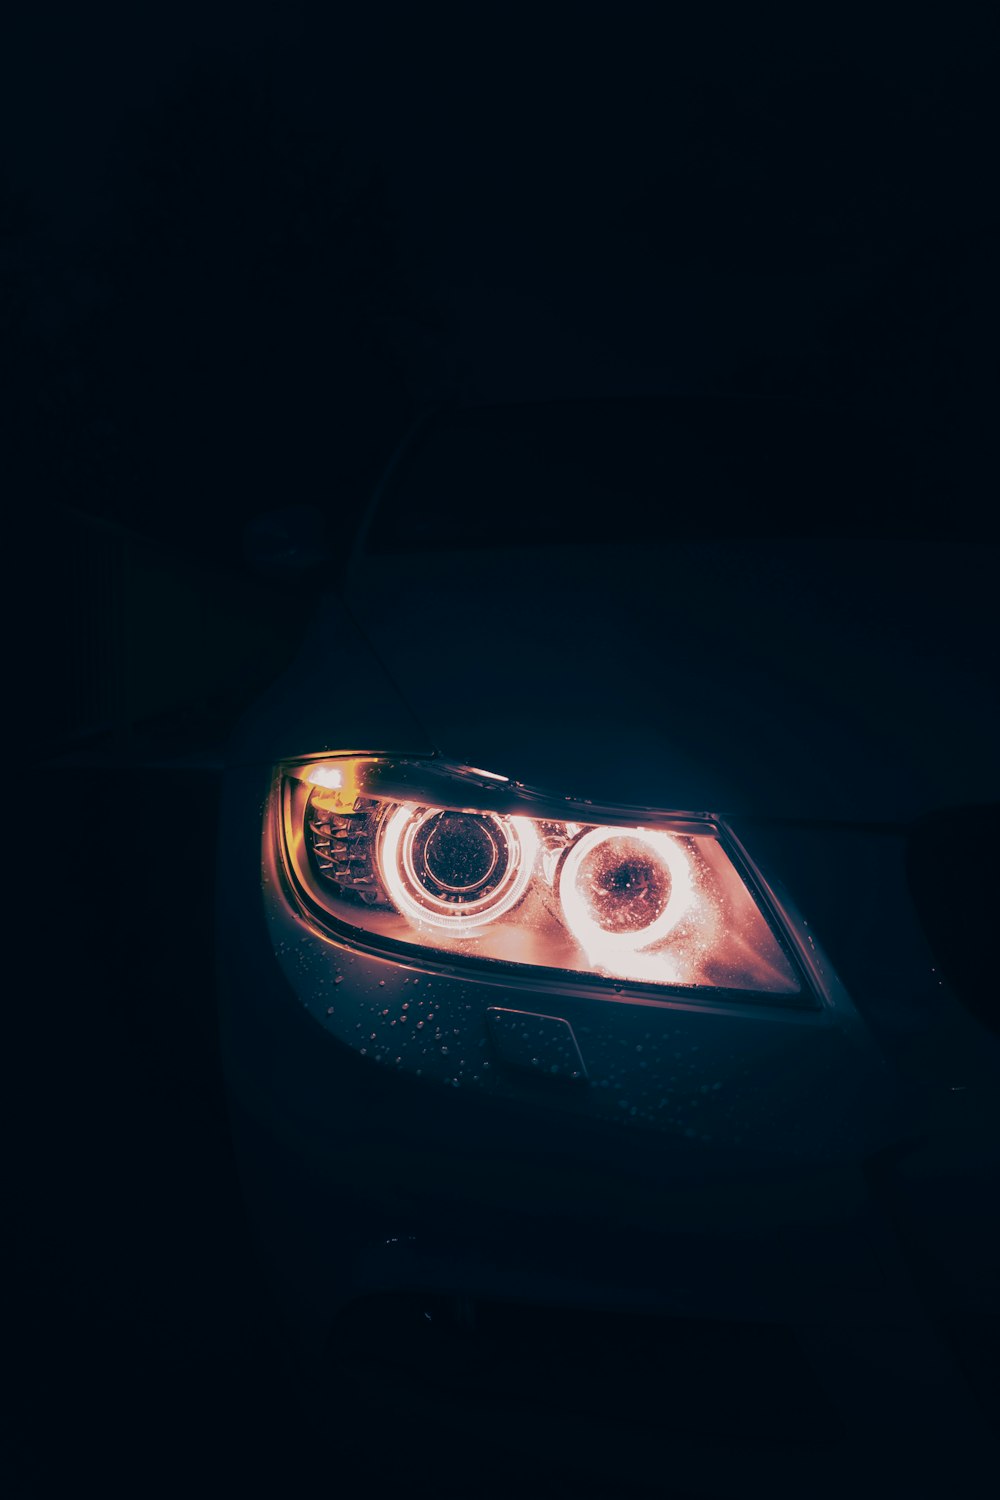 the headlights of a car in the dark